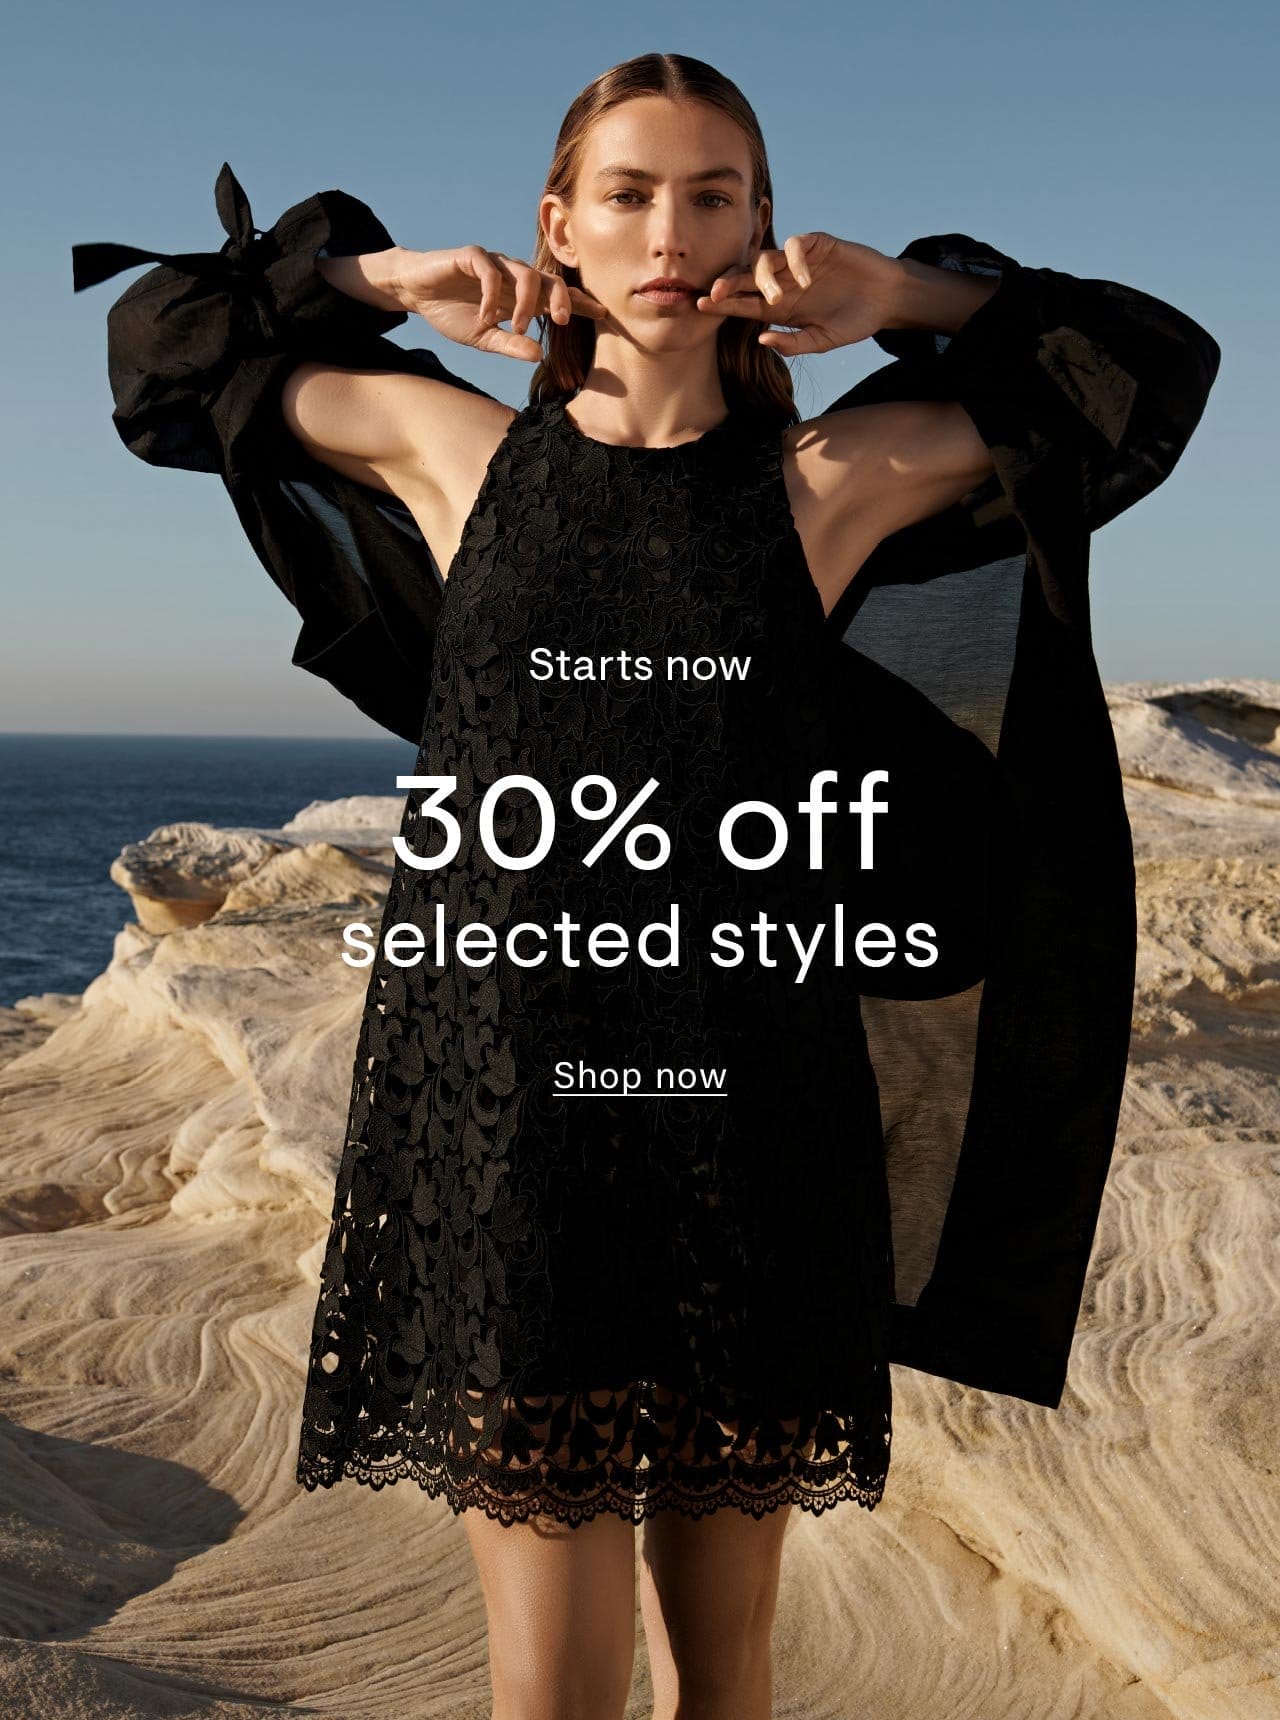 30% off selected styles